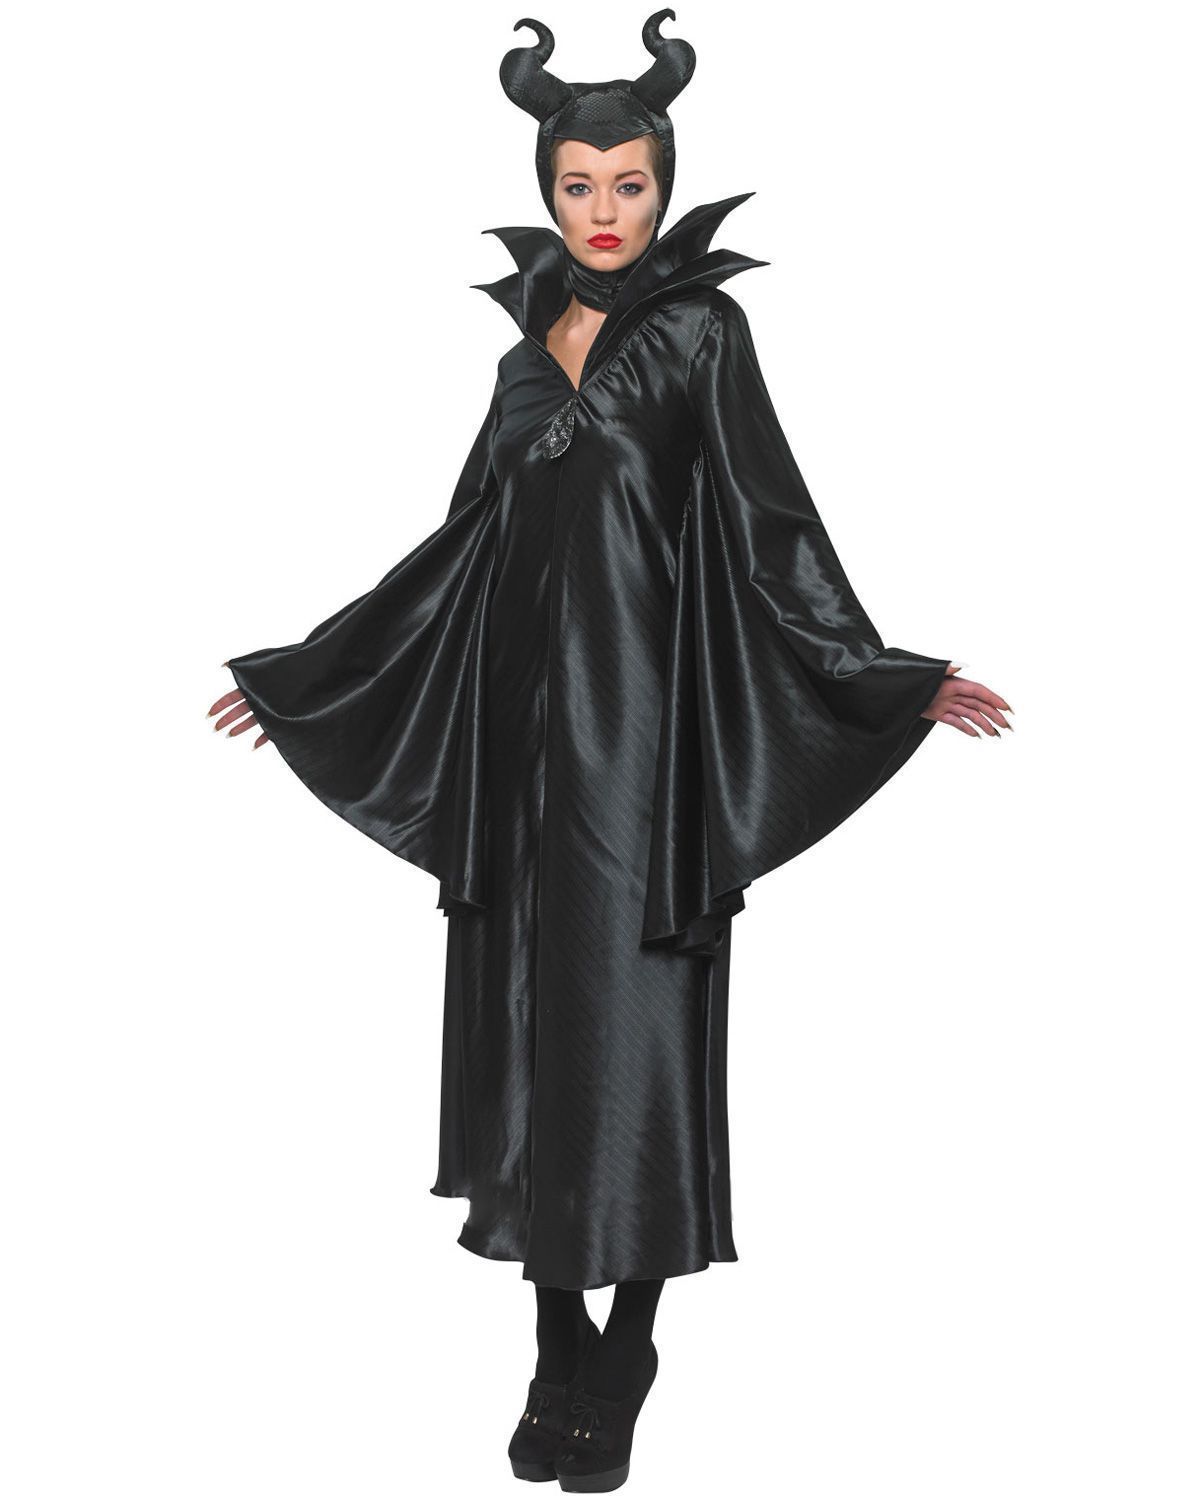 Maleficent Costume for Adults - Disney Sleeping Beauty